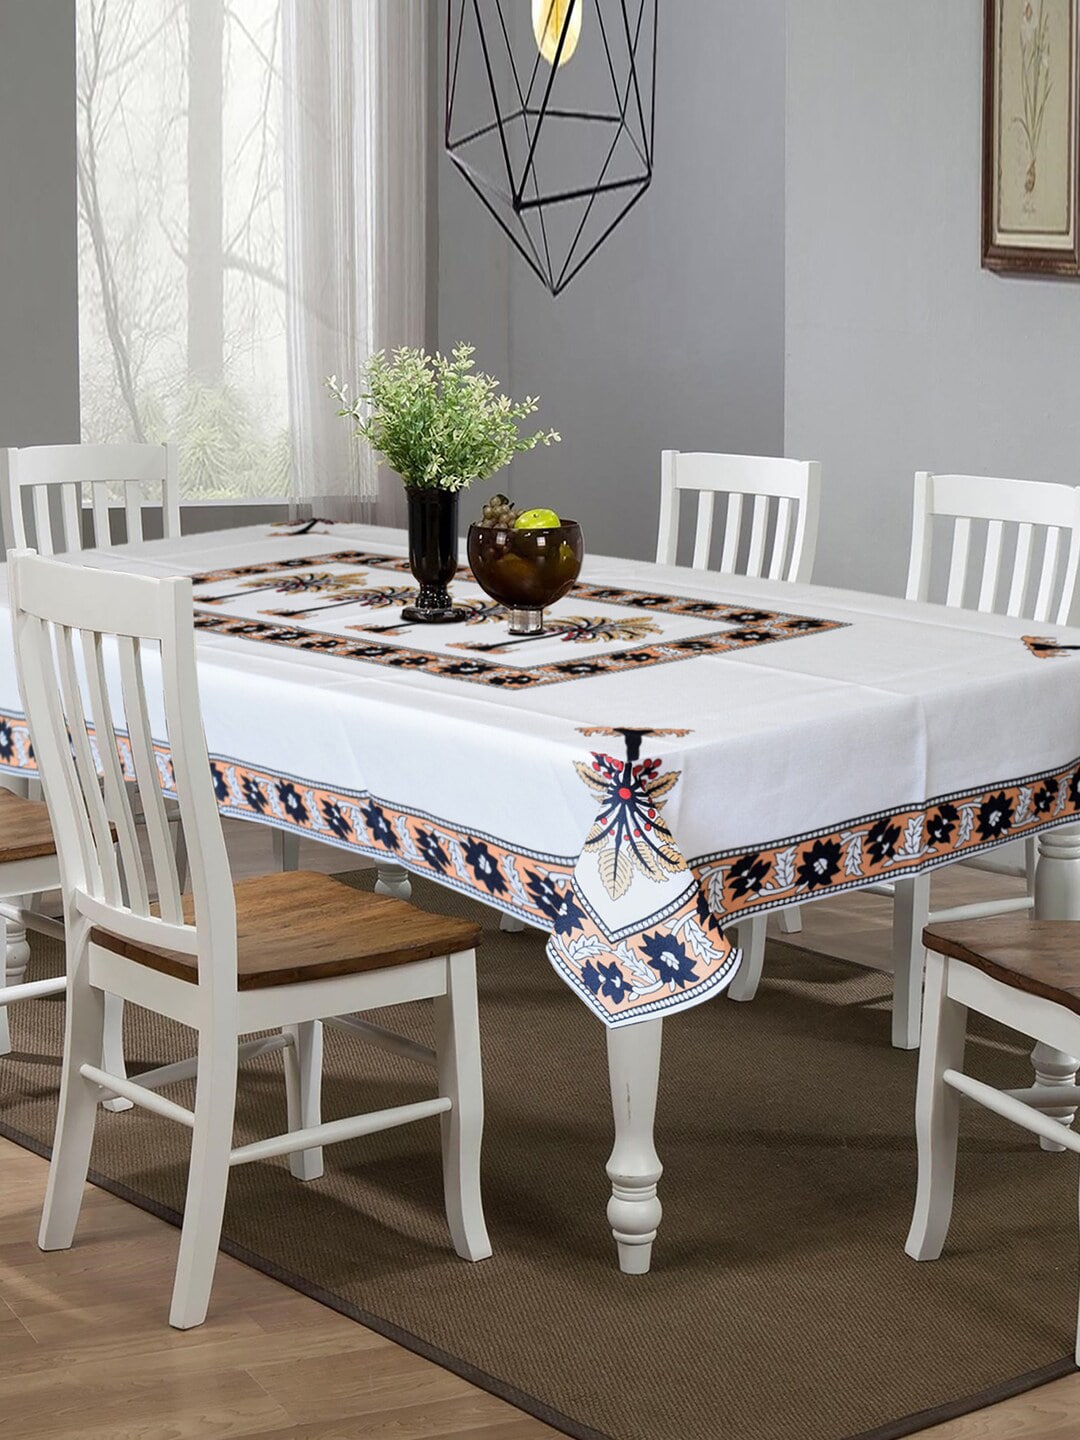 Kuber Industries Orange Printed 6-Seater Rectangle Table Cover Price in India